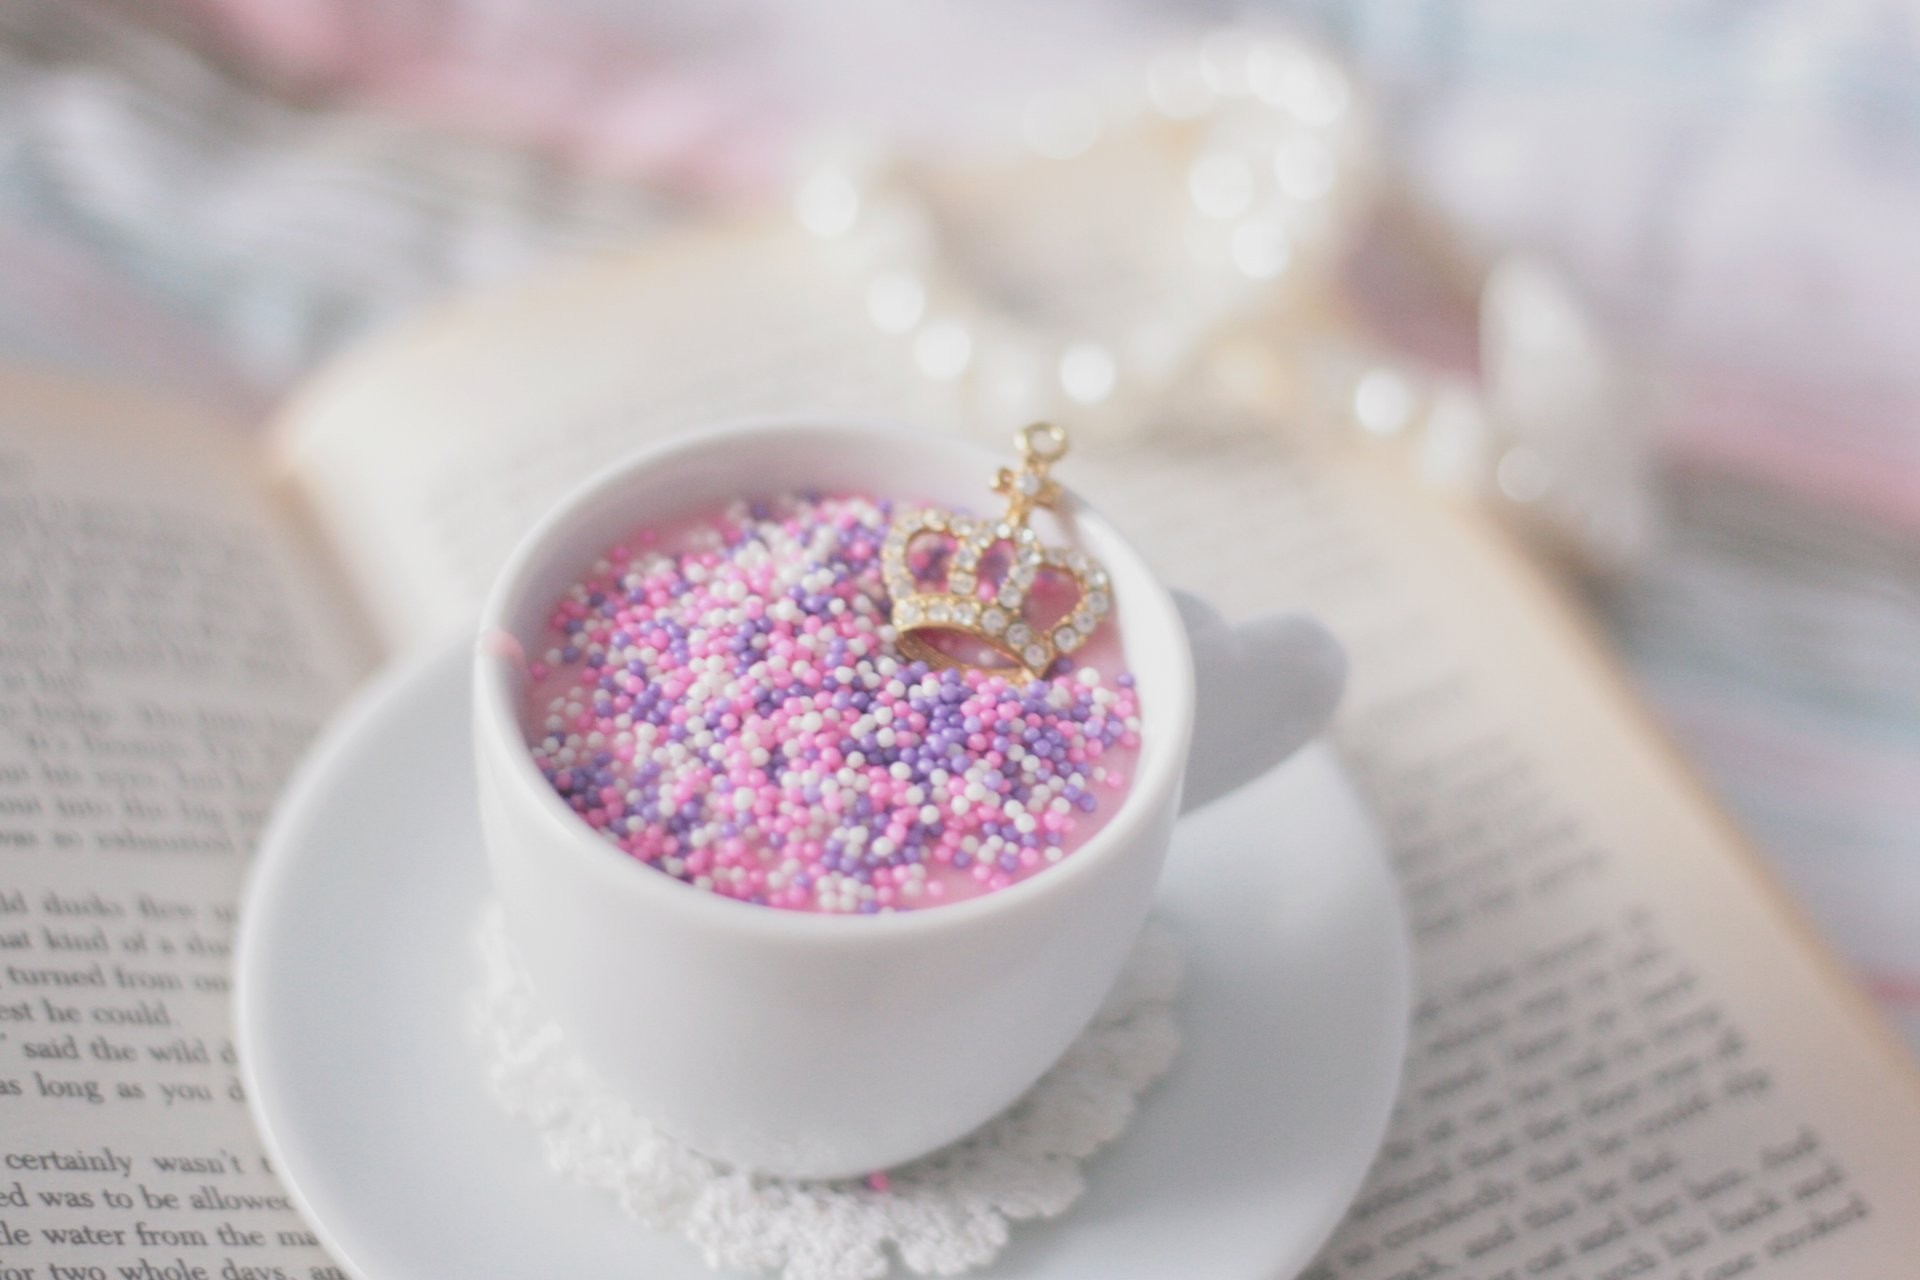 Mood cup mug dish color bright bulbs small crown decoration book background wallpapers desktop wallpaper widescreen. Your screen 1024×1024